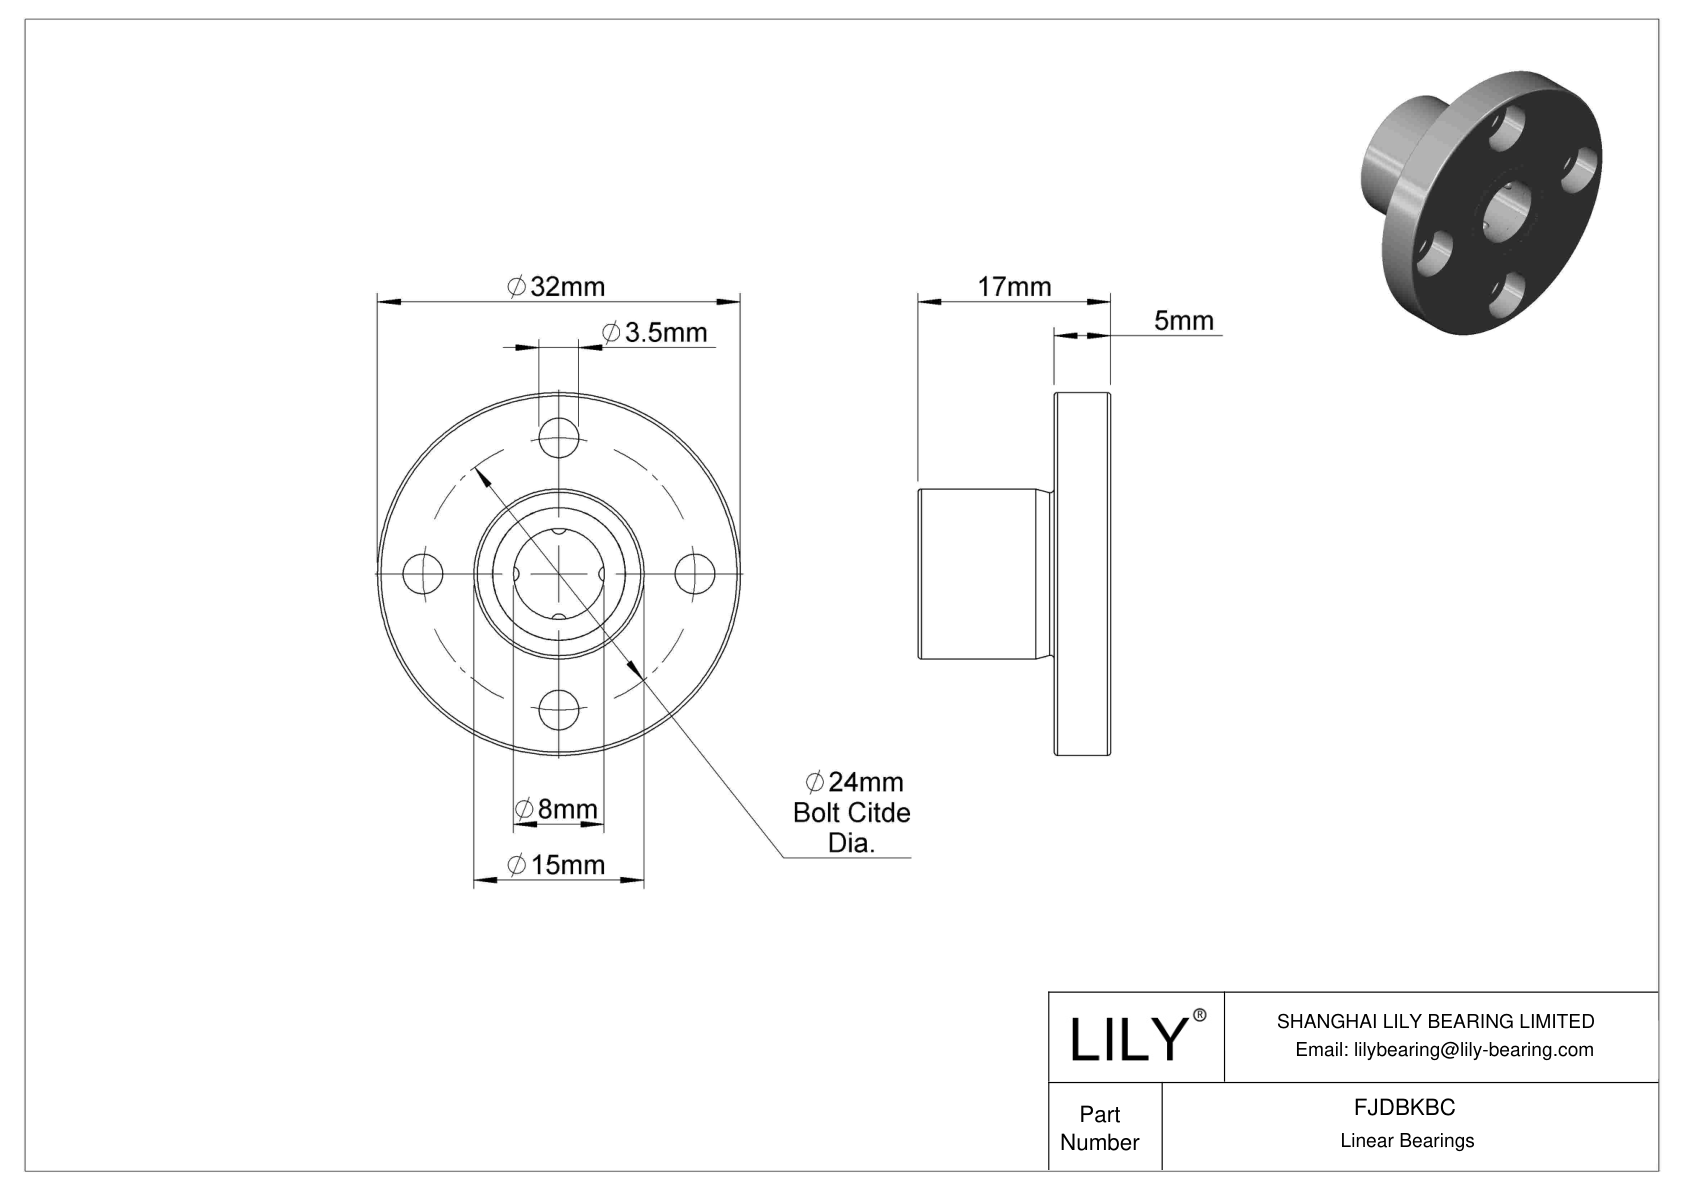 FJDBKBC Corrosion-Resistant Flange-Mounted Linear Ball Bearings cad drawing